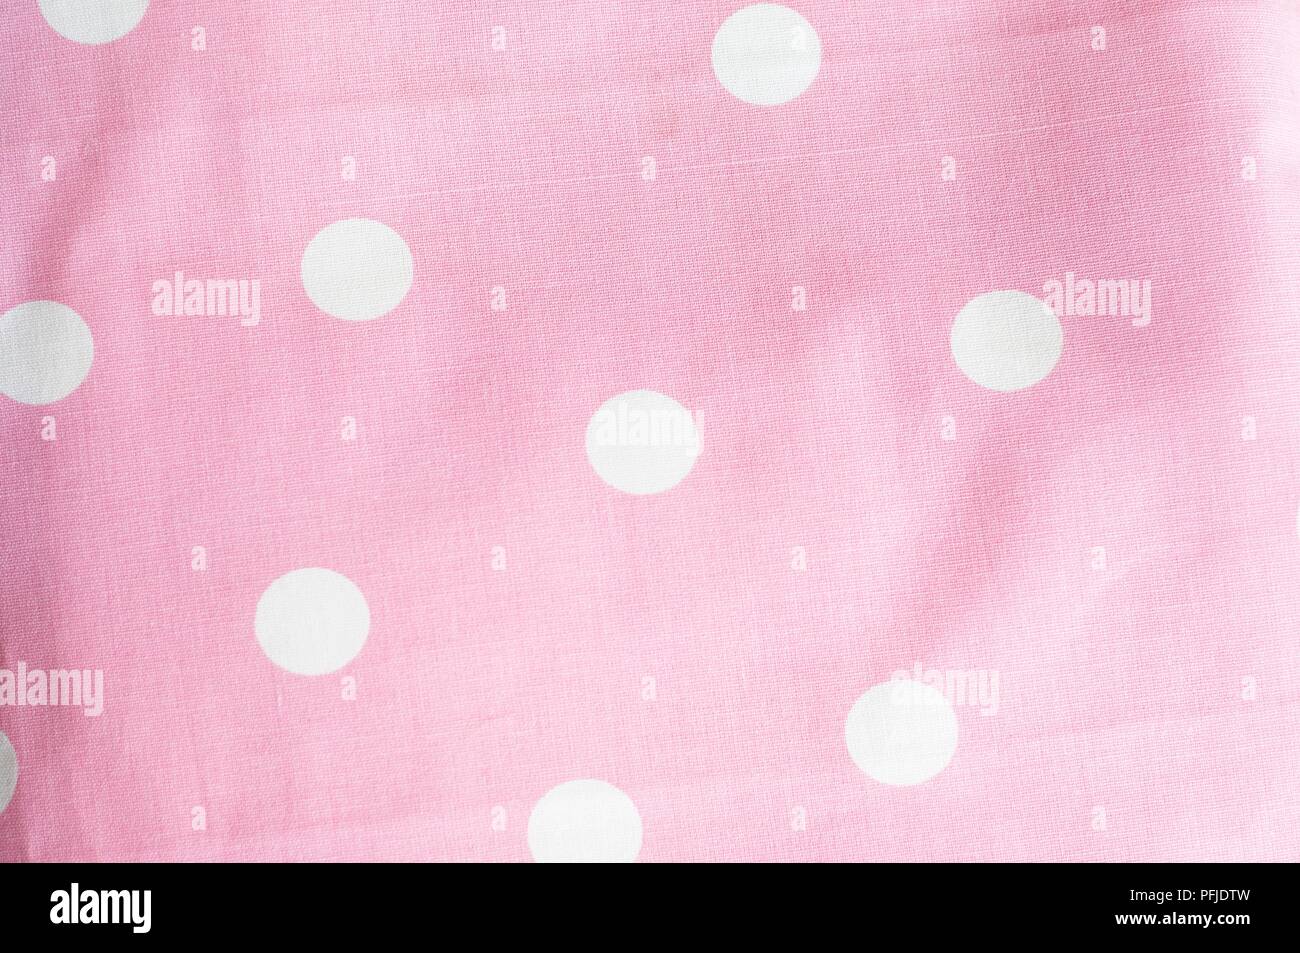 Patterned fabric, pink with white polka dots Stock Photo